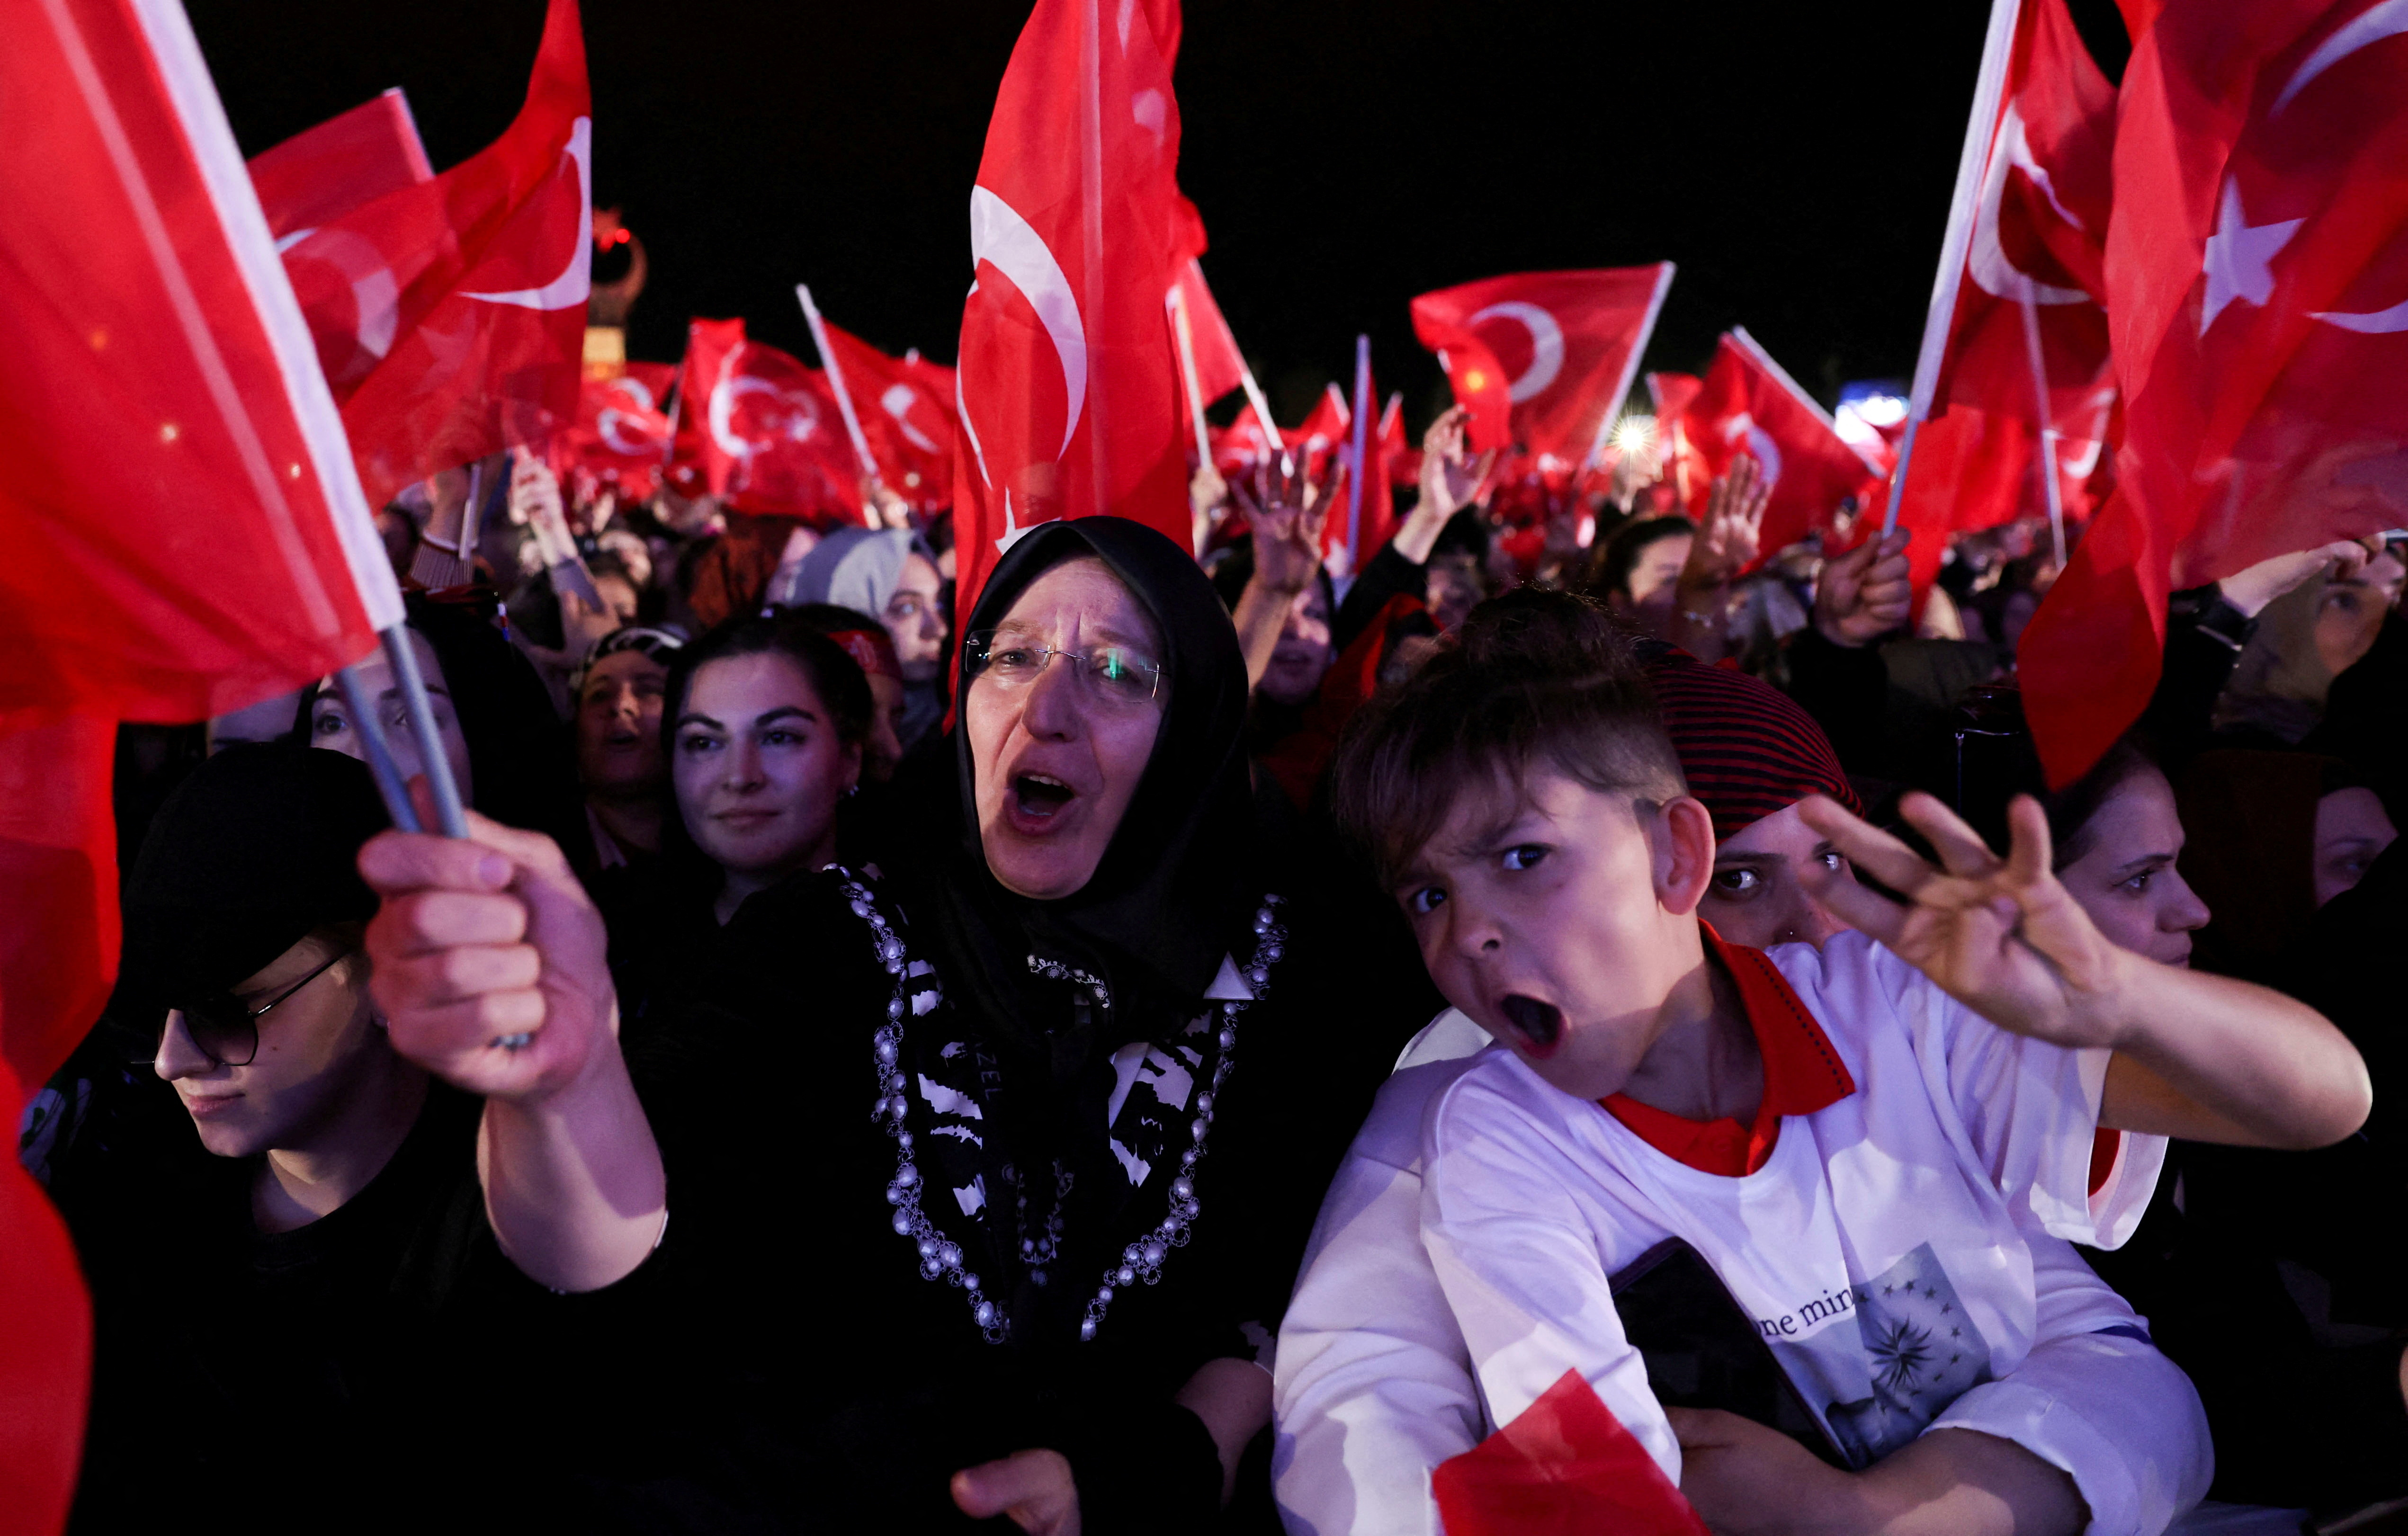 Supporters of Erdogan celebrate following his victory in the second round of the presidential election. /Umit Bektas / Reuters